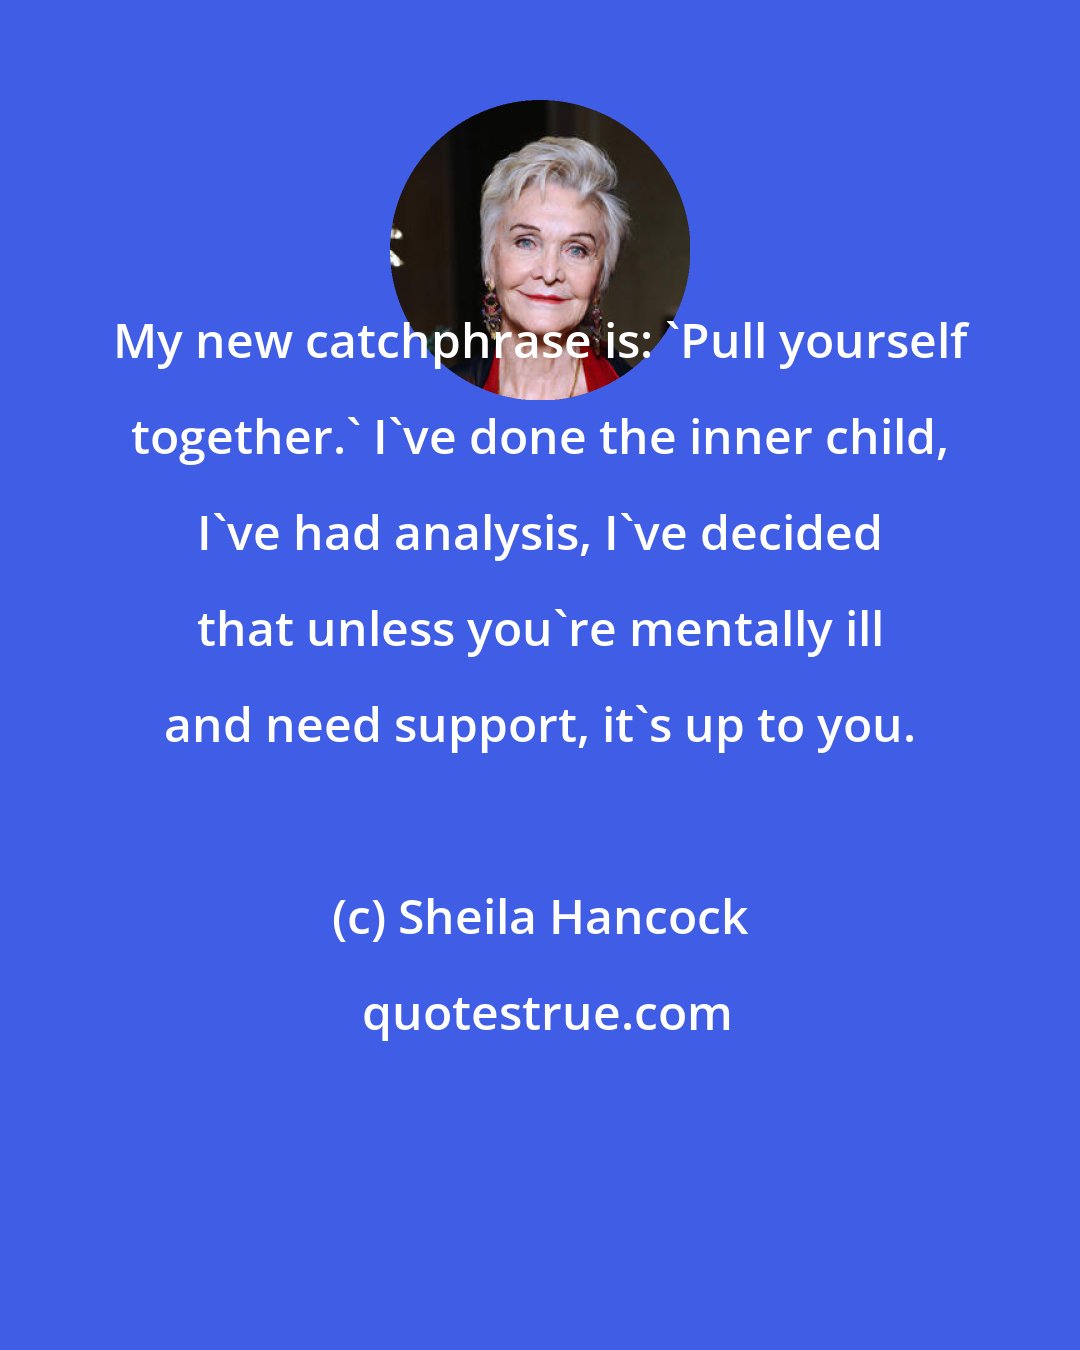 Sheila Hancock: My new catchphrase is: 'Pull yourself together.' I've done the inner child, I've had analysis, I've decided that unless you're mentally ill and need support, it's up to you.